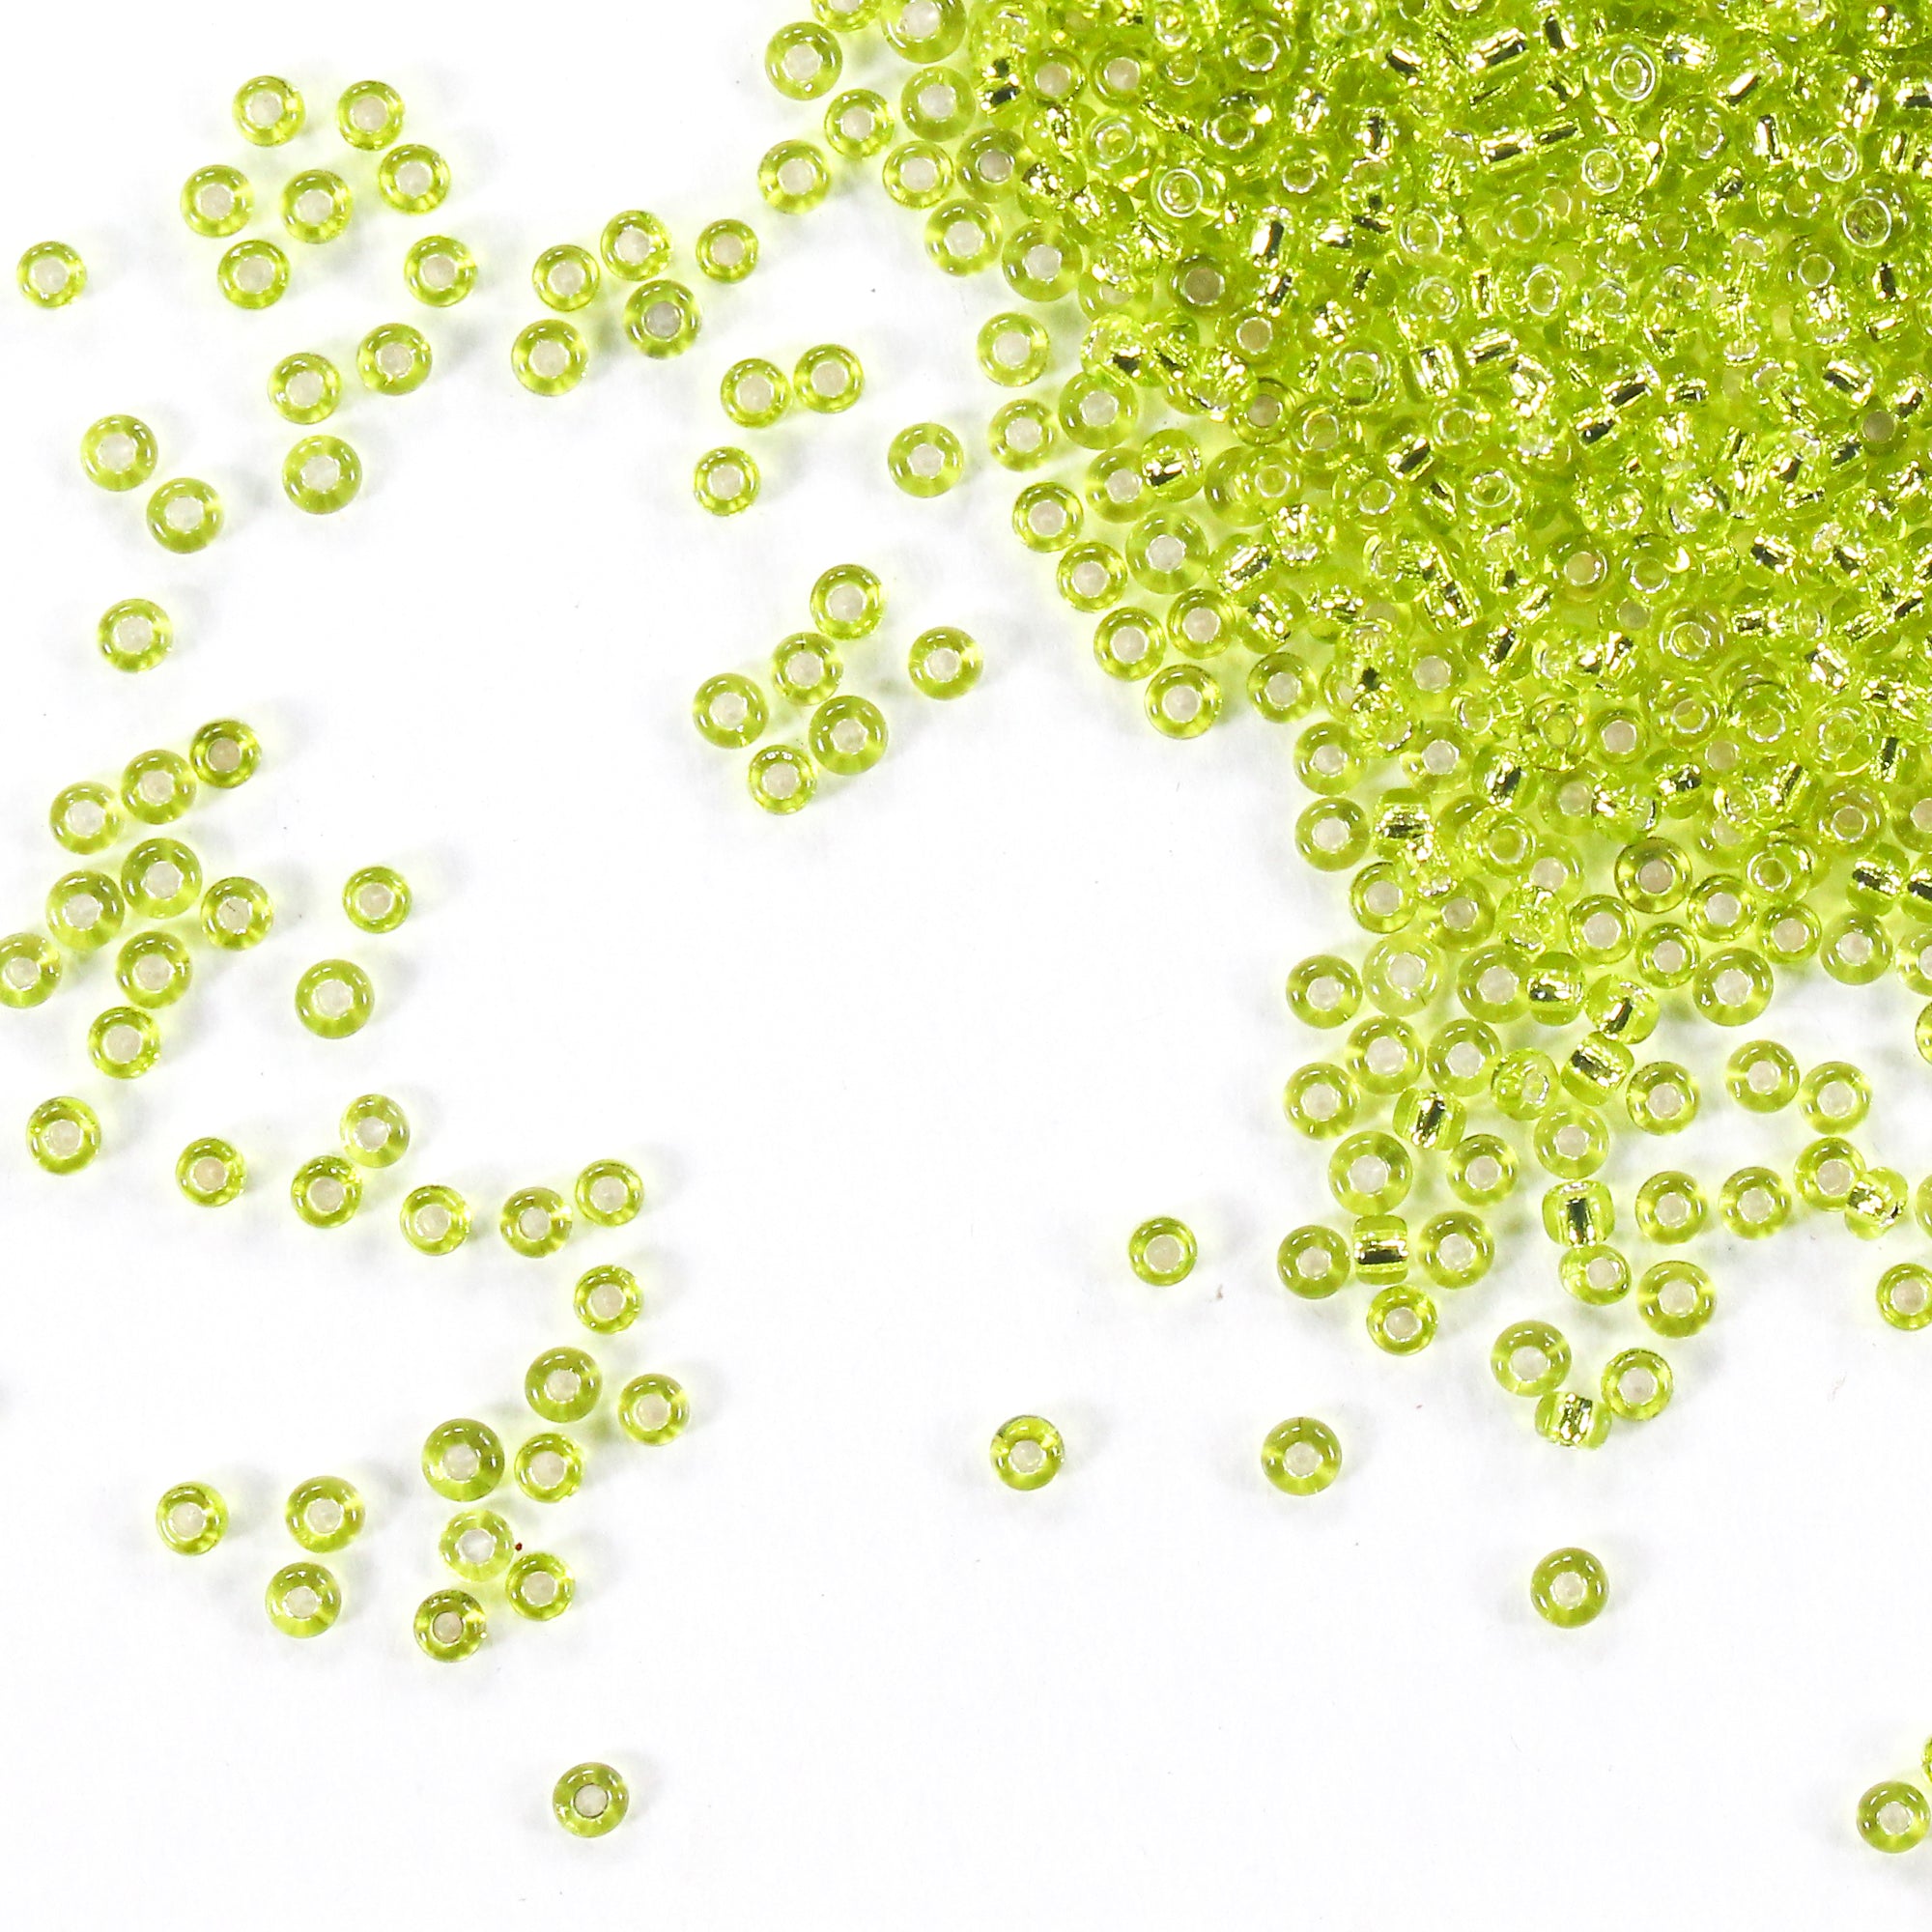 Seed Beads Transparent Green 0.5Mm 30Gm